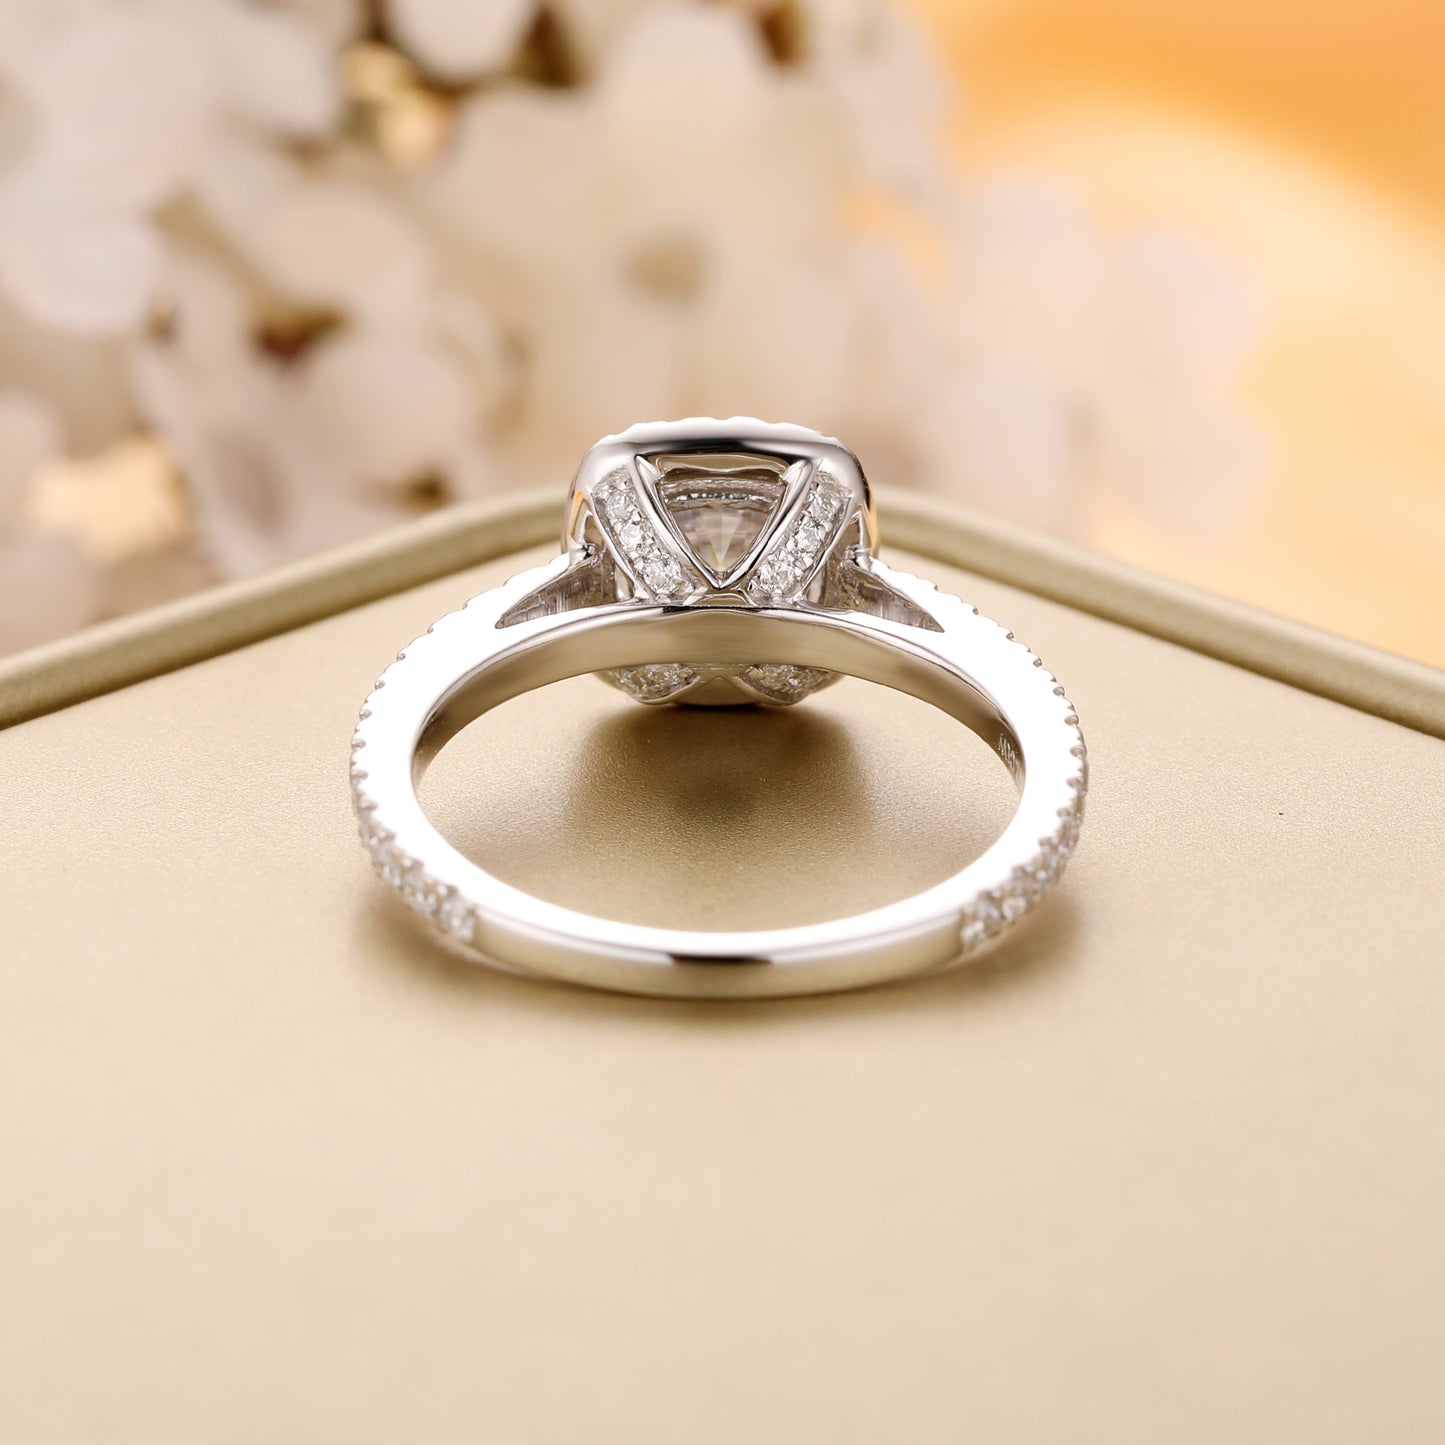 G022 Unique Design 1.1 Carat Cushion Cut Solitaire Halo Pave Setting Moissanite Engagement Ring Gifts For Her